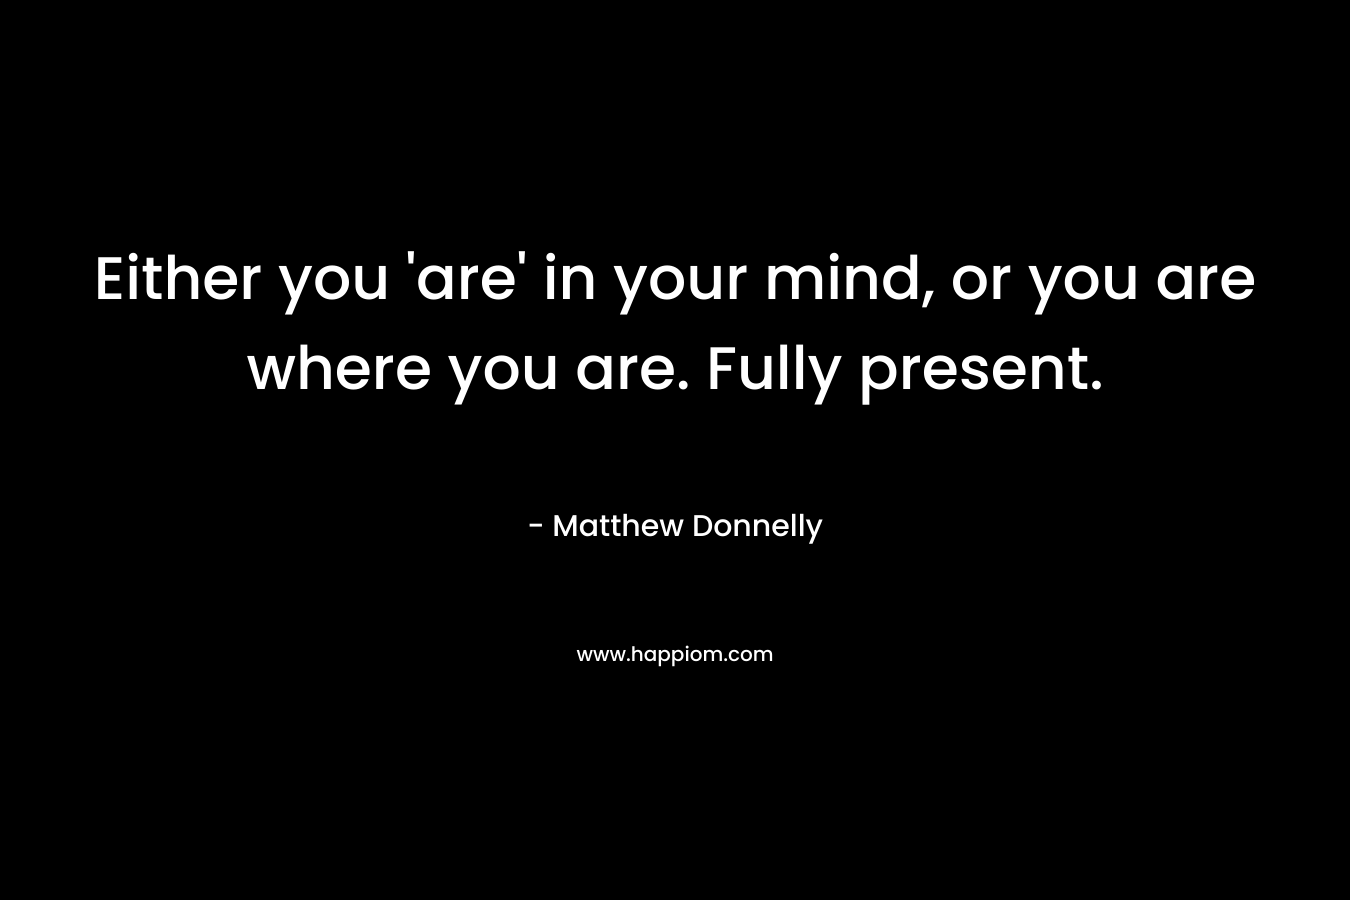 Either you ‘are’ in your mind, or you are where you are. Fully present. – Matthew Donnelly